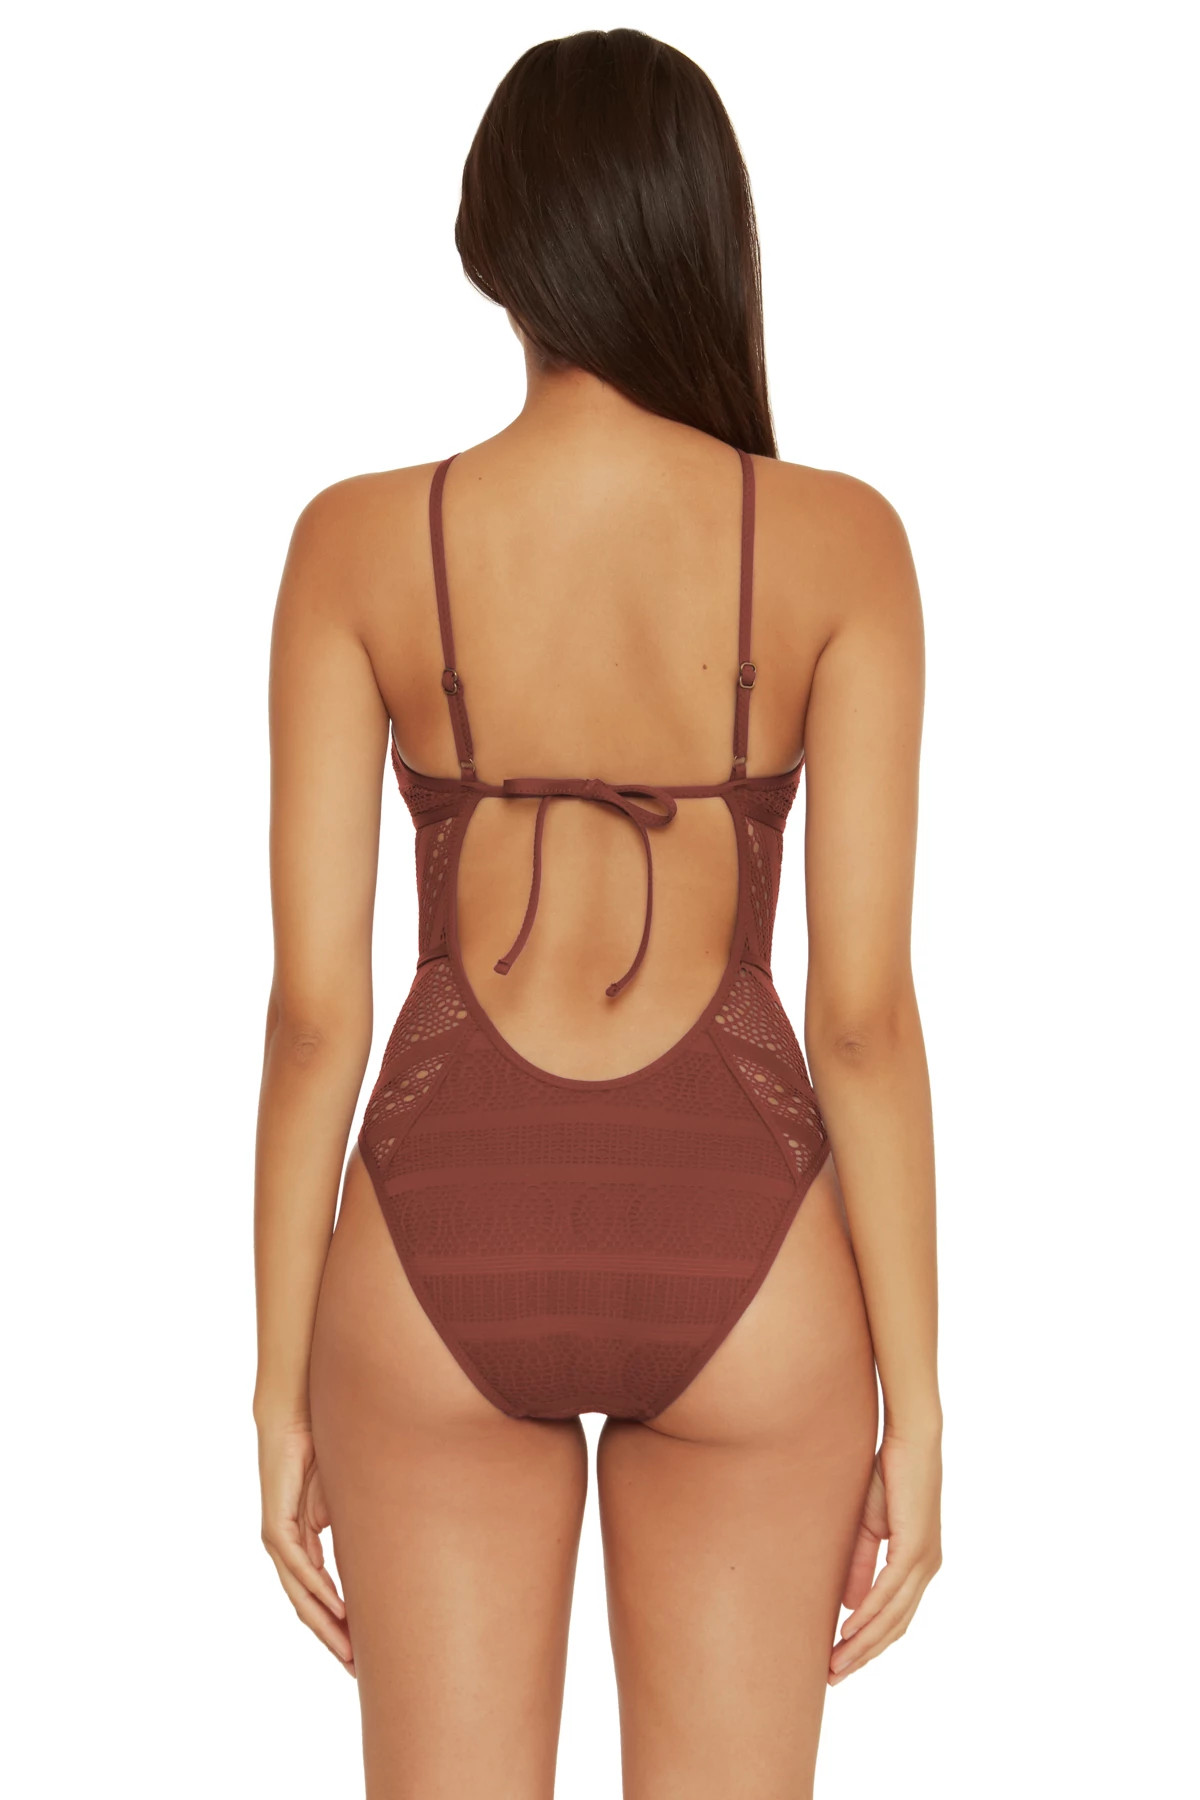 COCONUT Avah High Neck One Piece Swimsuit image number 2